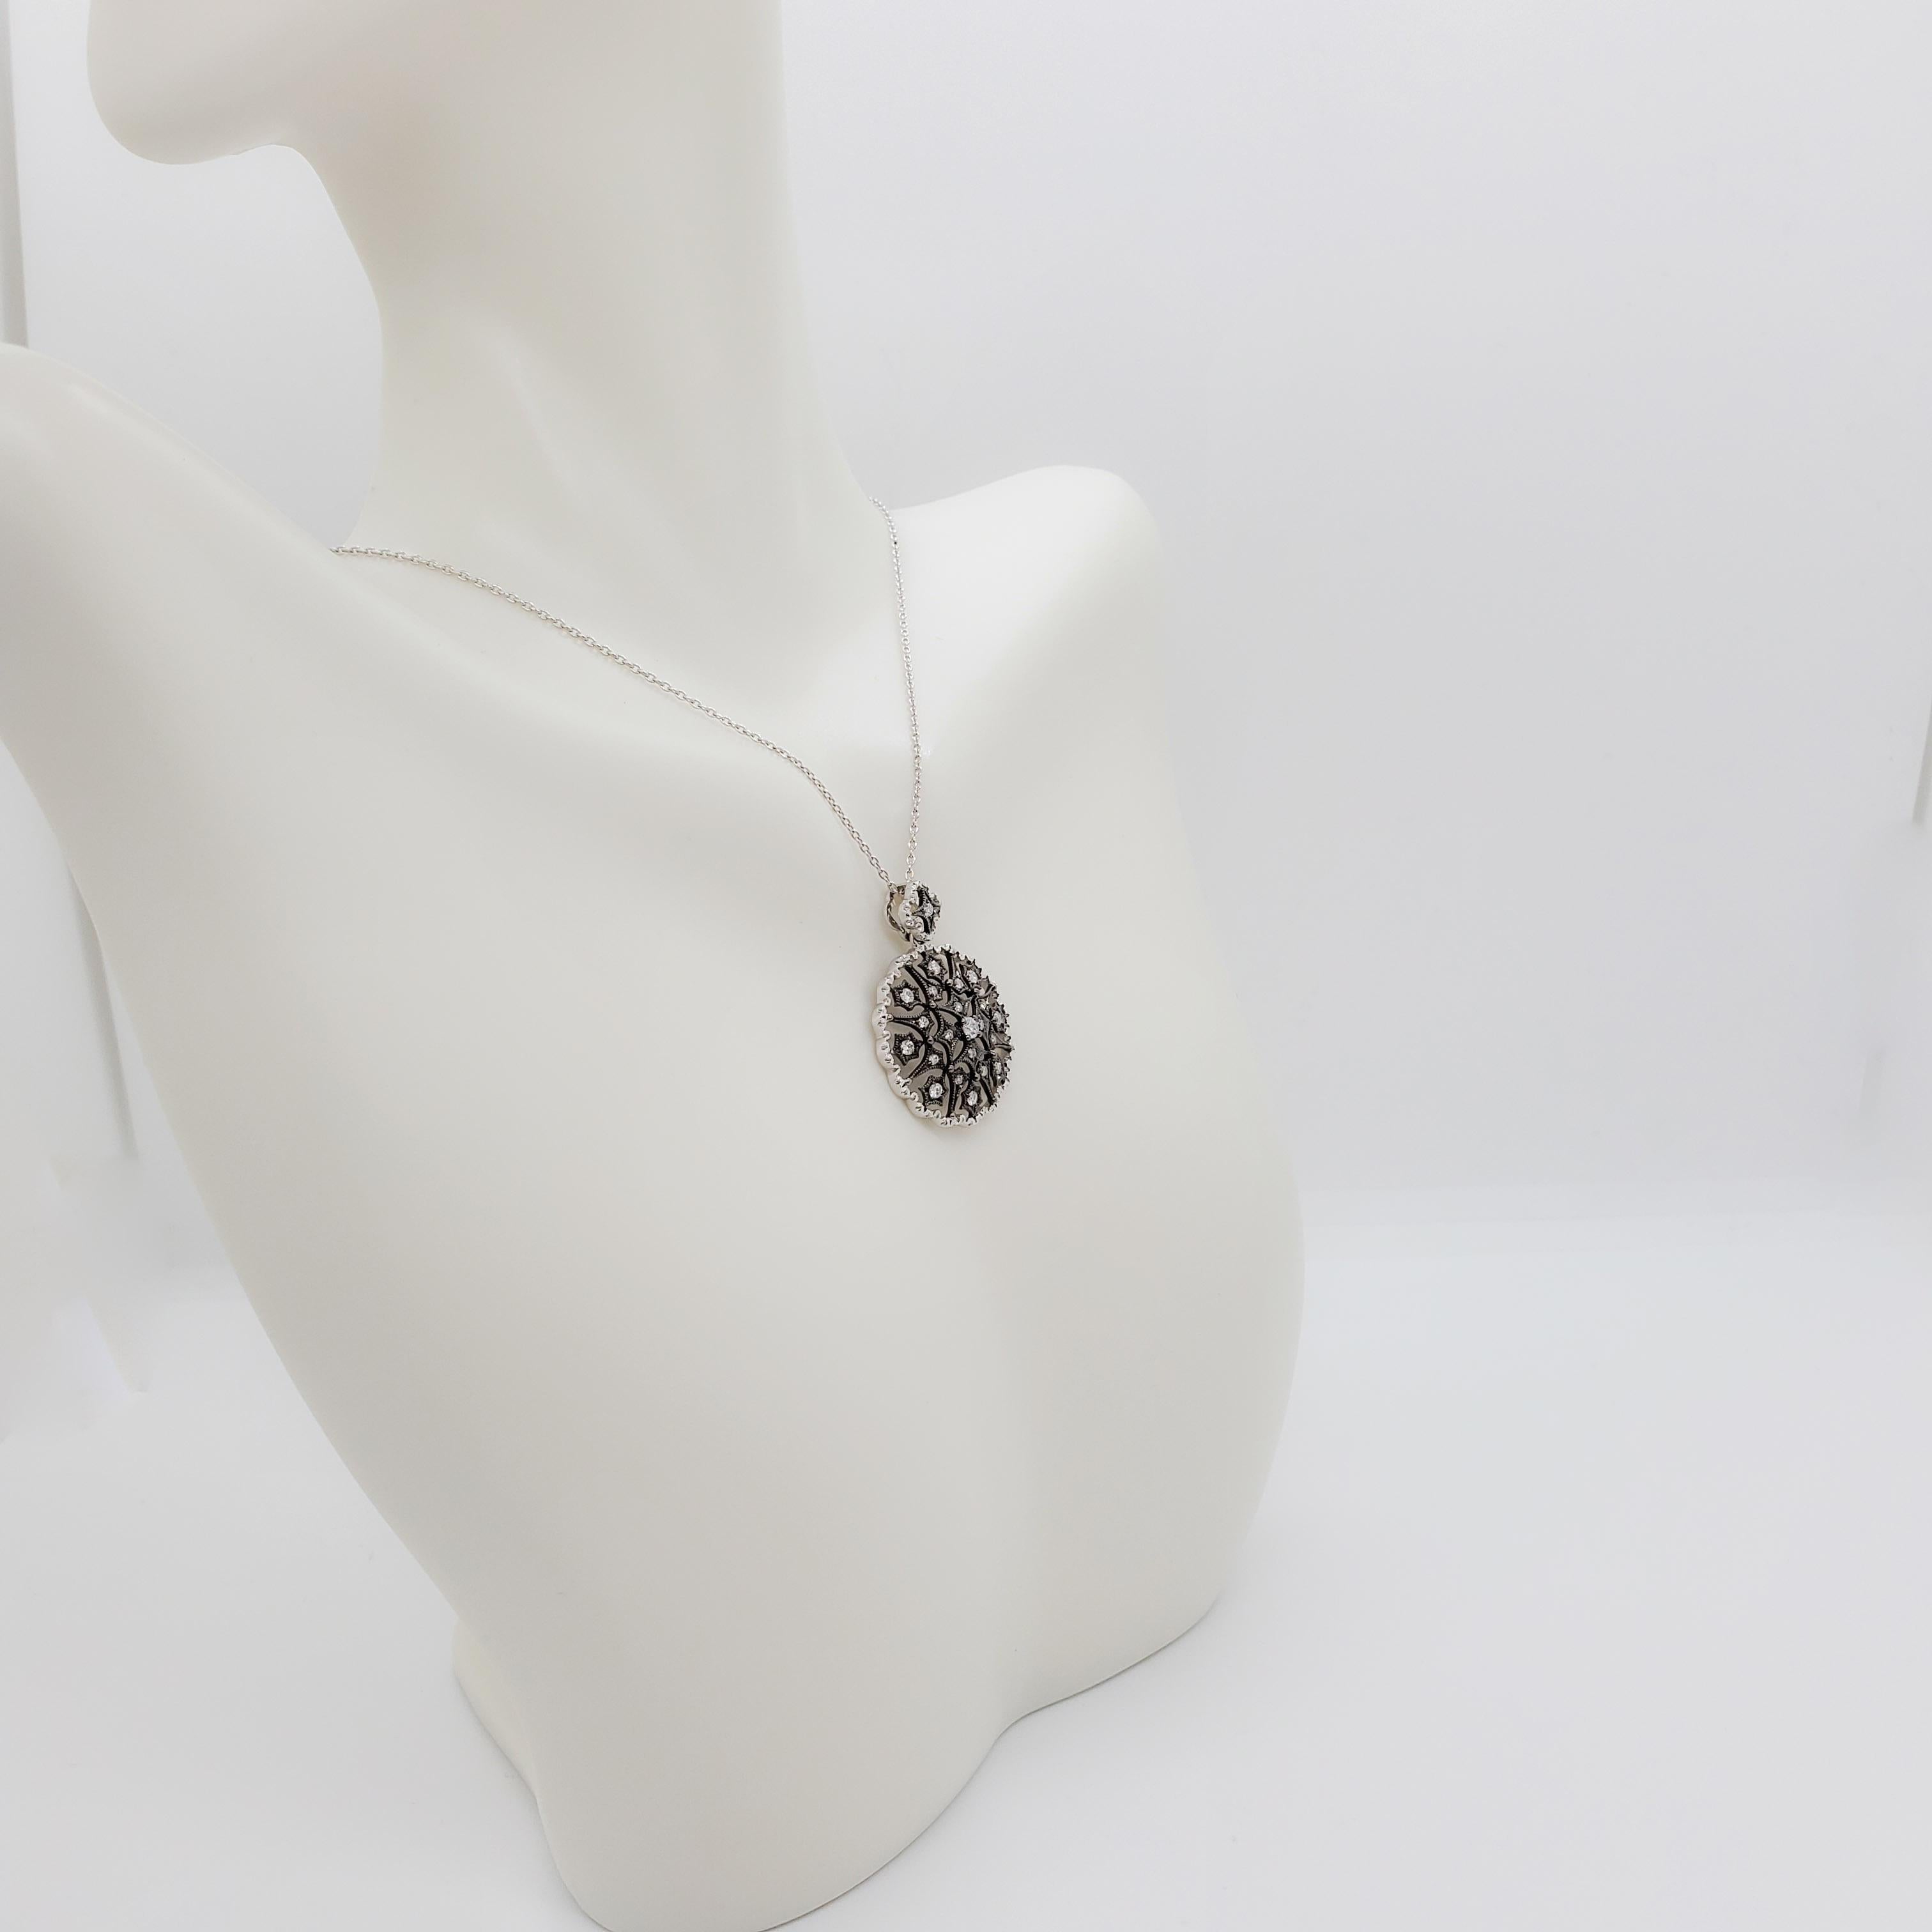 White Diamond Pendant Necklace in 18k White Gold and Black Rhodium In Excellent Condition For Sale In Los Angeles, CA